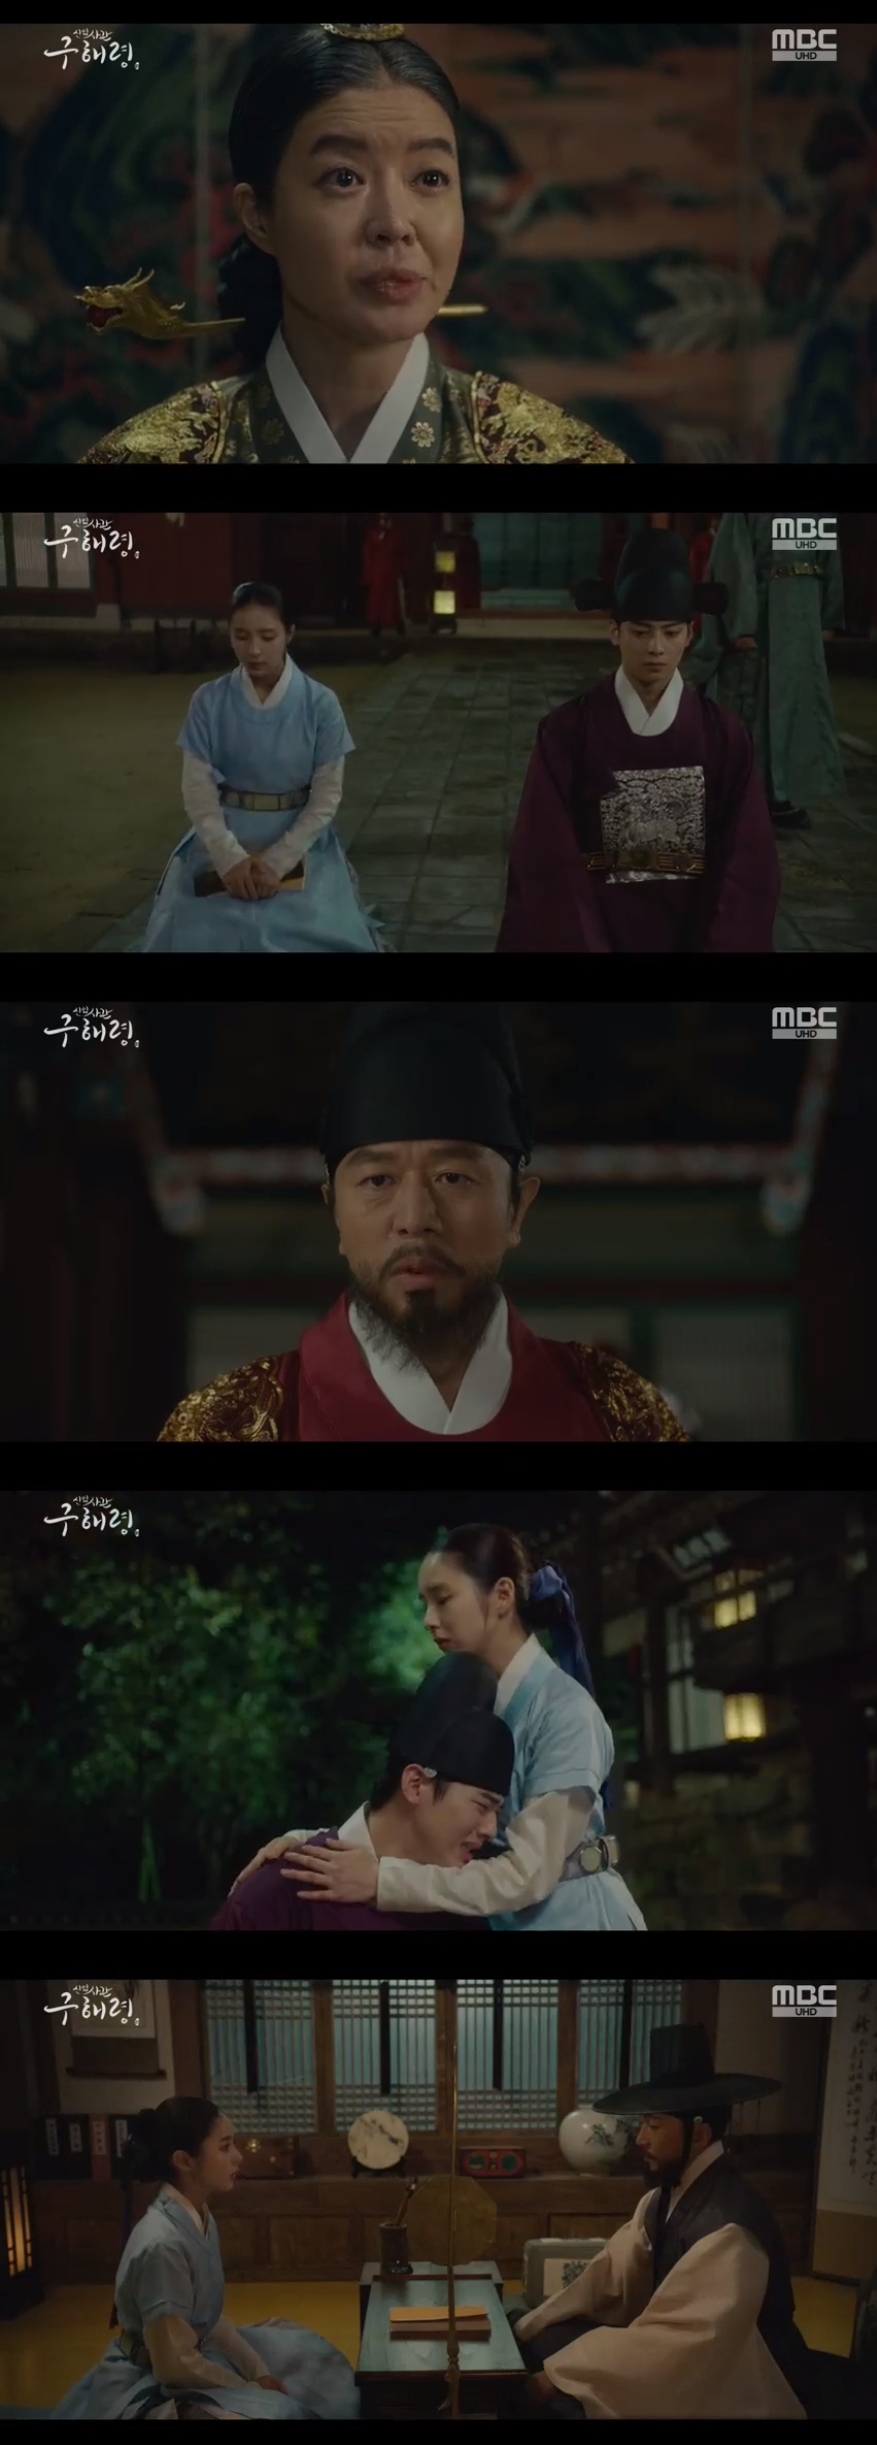 Shin Se-kyung and Cha Eun-woo, the new officers Rookie Historian Goo Hae-ryung, knew the truth about Seoraewon and the lungs Hodam teacher.In the 35th and 36th MBC drama The New Entrepreneur Rookie Historian Goo Hae-ryung broadcasted on the 19th, Rookie Historian Goo Hae-ryung and Lee Lim (Cha Eun-woo) approached Secret in Seoraewon.On this day, Rookie Historian Goo Hae-ryung and Lee Lim knew that the King Hee Young-gun Lee was Lees father and teacher.Lee has always dreamed of ruining, and Rookie Historian Goo Hae-ryung has revealed Secret that his father, who was dean of Seoraewon 20 years ago, died of indecent crimes.Rookie Historian Goo Hae-ryung recalled his father and wept as he said, I am running for 20 years, I am.Irim was one step closer to Rookie Historian Goo Hae-ryung without knowing it, but he stopped and bit back his feet.The two then revealed their willingness to understand what the father of Rookie Historian Goo Hae-ryung, Youngan, was accused of and died, what happened in Seoraewon, and why Hodam became a lung.Lee then asked Heo Sam-bo (Seong Ji-ru) about the day he was born; when Heo Sam-bo told the lie, Irim left the palace, suspecting, What are you hiding from me?Rookie Historian Goo Hae-ryung searched the house and found an old birds-eye hidden by Koo Jae-kyung (Fairy-hwan).He asked the officers of the presiding officer Kim Il-mok, who was used in the report, and found out that Kim Il-mok was tortured when he was not going to give up his diary when the Kings Diary was held.Among them, Lim (Kim Yeo-jin) and King Lee Tae (Kim Min-sang) confronted each other. The contrast asked why Min Ik-pyeongs life is still attached and nailed him not to forget his terms.He also added that if something happened to the Taoist, he would hang himself and die.Itae was dizzying, and Irim had come to me to ask for something, and Irim waited for it to be night.When Itae was belatedly asking what he wanted to ask, Irim asked, Have you ever loved the device for a moment?But Itae turned coldly, not answering Irims words. Irim returned to the meltstone and cried silently.Rookie Historian Goo Hae-ryung, who watched from the side, embraced Lee and comforted him and tears together.There was a shocking incident in which the temple of Hodam, a gold medal, was sprayed in the whole palace.With the people in the palace selling their eyes to the gold book, Min Ik-pyeong (Choi Deok-moon) nailed Lee Tae to find and punish the person who circulated the gold book.Rookie Historian Goo Hae-ryung read the Hodam Teacher secretly by the officers of the presbytery and knew the beginning and end of the Seoraewon.I also learned about the unfair death of Hodam, the father of Irim, and Youngan, the father of Rookie Historian Goo Hae-ryung.Rookie Historian Goo Hae-ryung later confronted Koo Jae-kyung because he assumed that he was the culprit who wrote and circulated Hodam Teachers War.Rookie Historian Goo Hae-ryung asked Koo Jae-kyung the truth, saying, Even my brother can not lose that much.However, Koo Jae-kyung told the truth that he was for the safety of Rookie Historian Goo Hae-ryung.Rookie Historian Goo Hae-ryung went to Leerim.He brought out the story of Sacho that Kim Il-mok had hidden 20 years ago and focused his attention on the whereabouts of Sacho with Lee Lim.